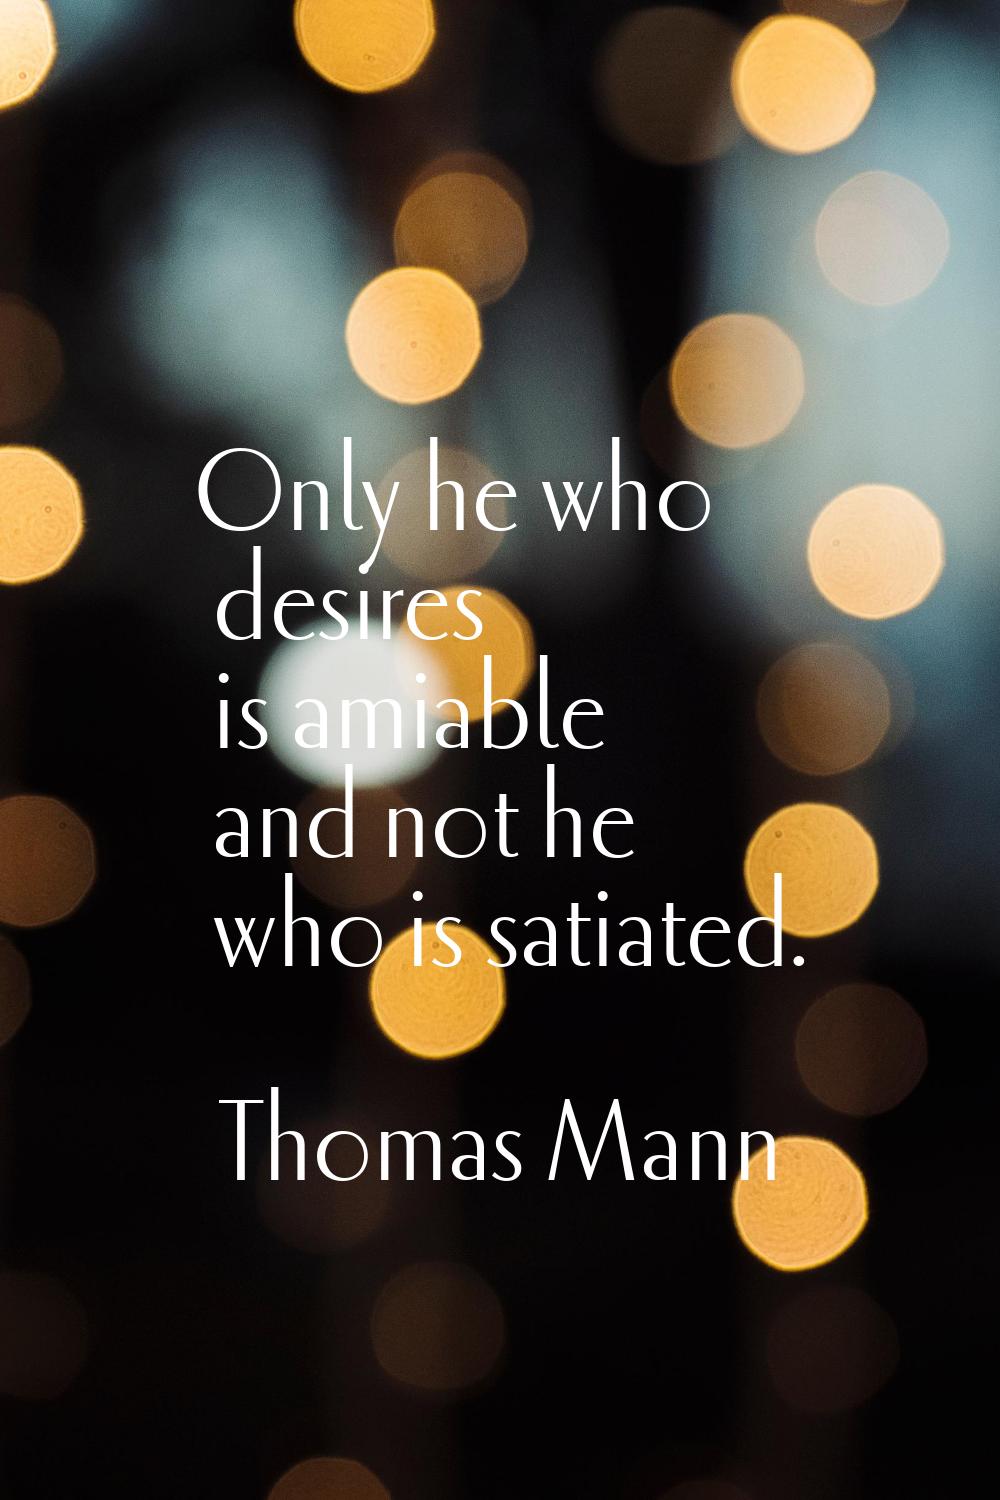 Only he who desires is amiable and not he who is satiated.